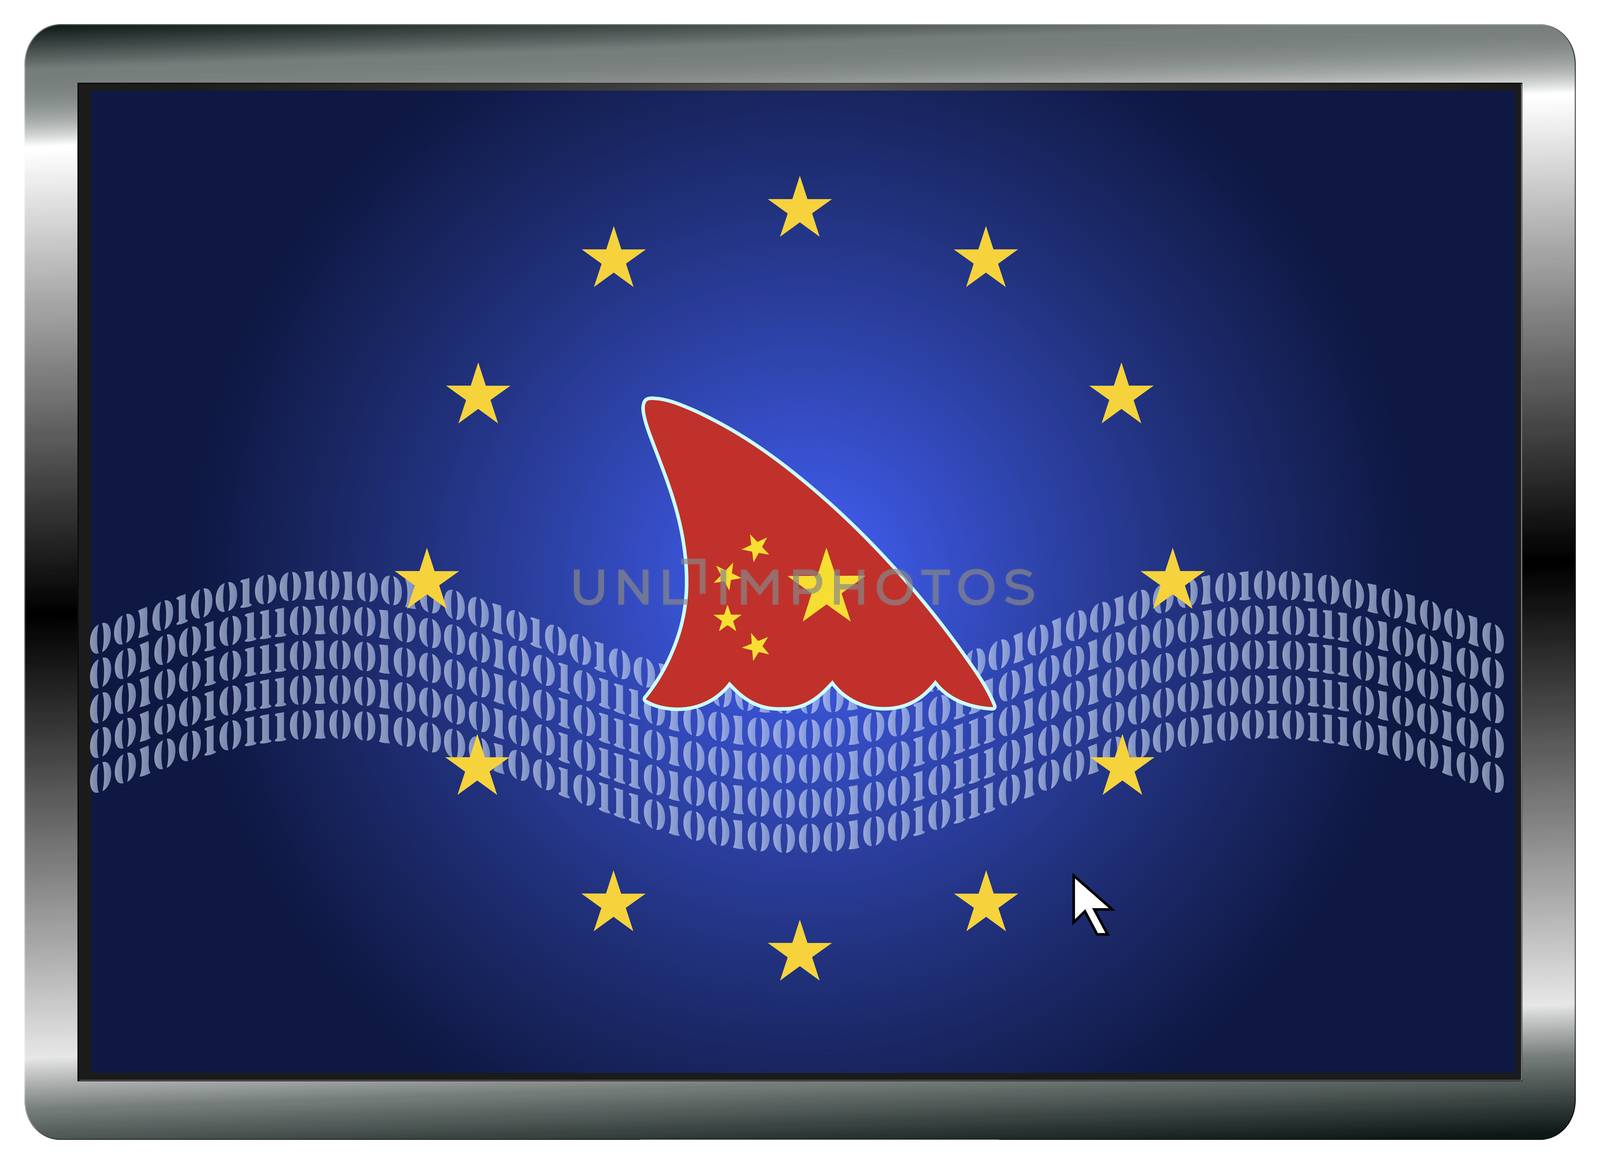 China spying in Europe by Bambara